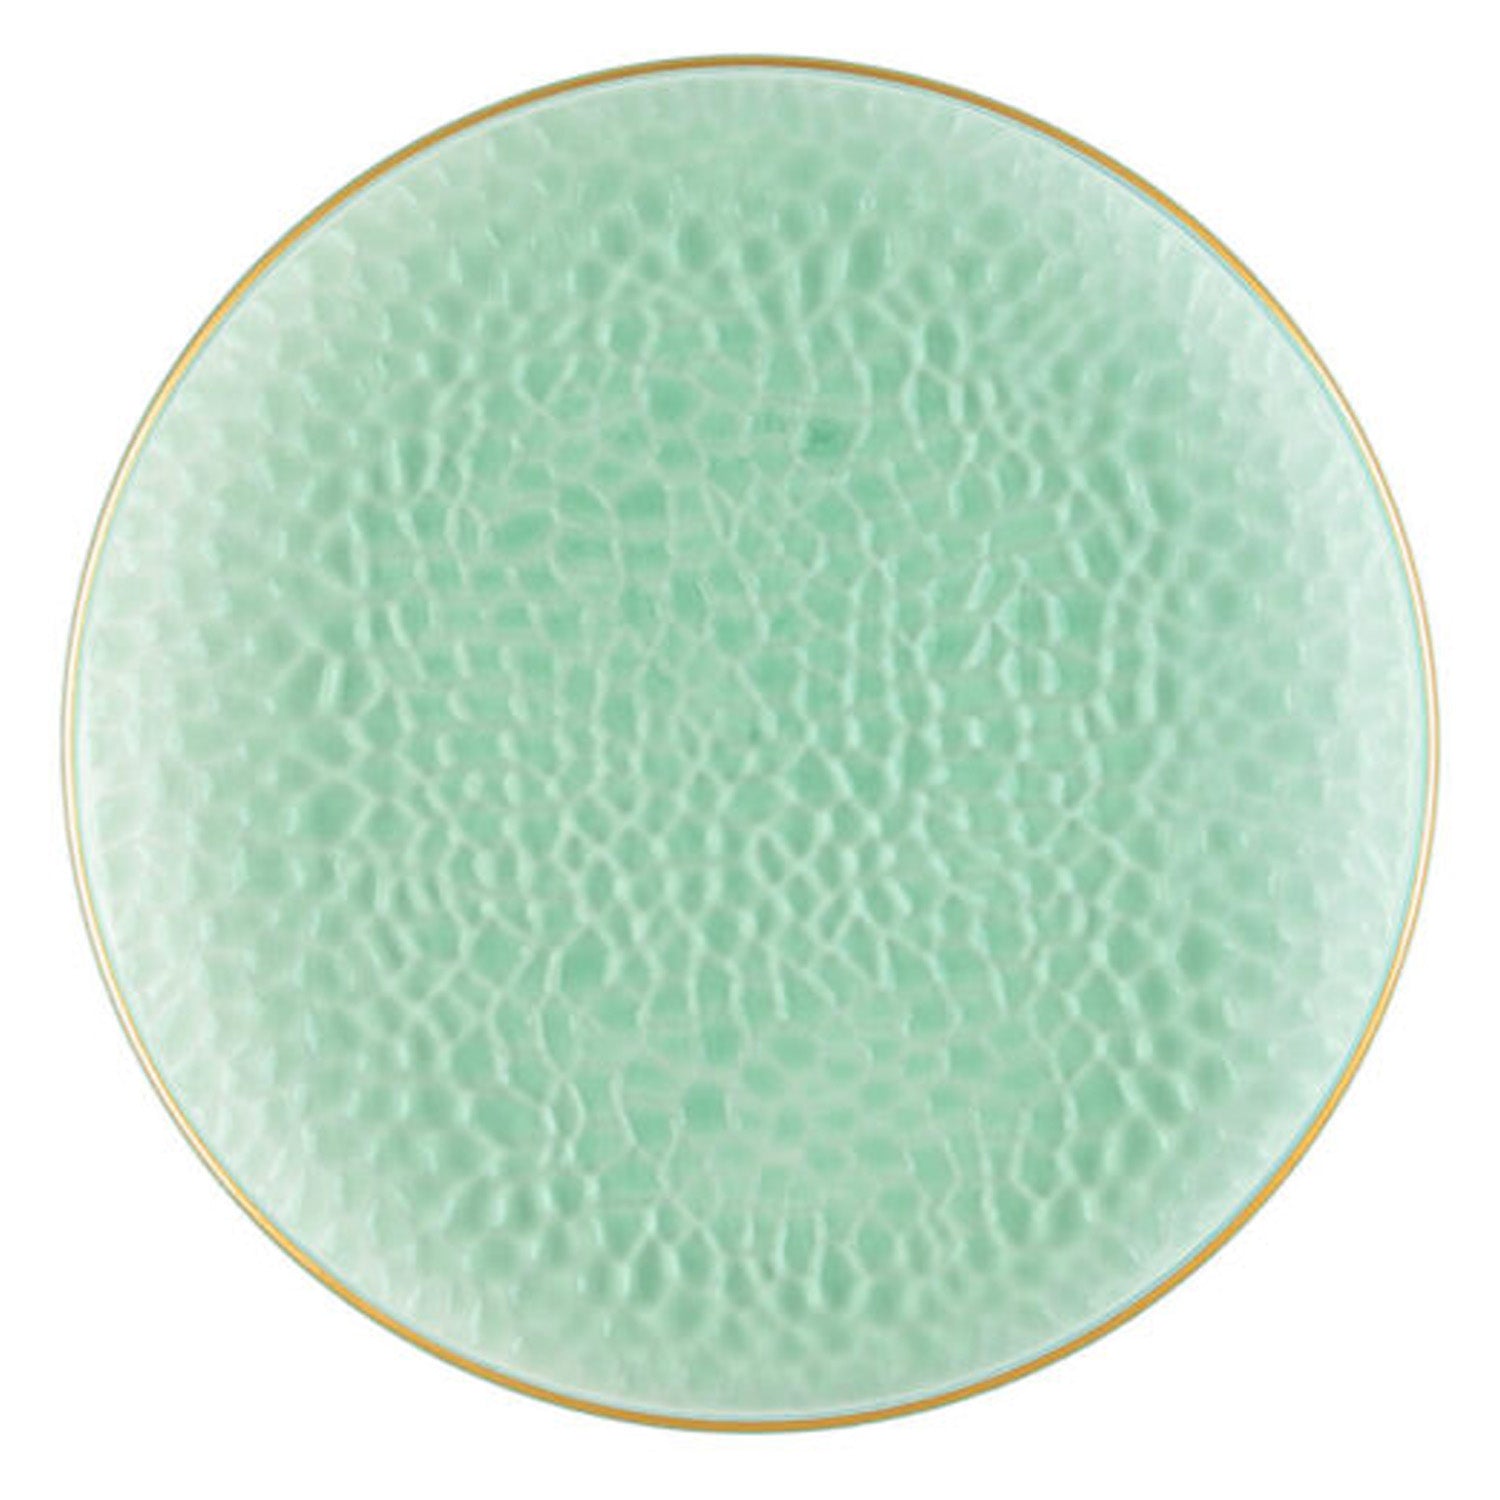 Organic Hammered Green Gold Rim 10″ Plates Tablesettings Blue Sky 10 Pieces  